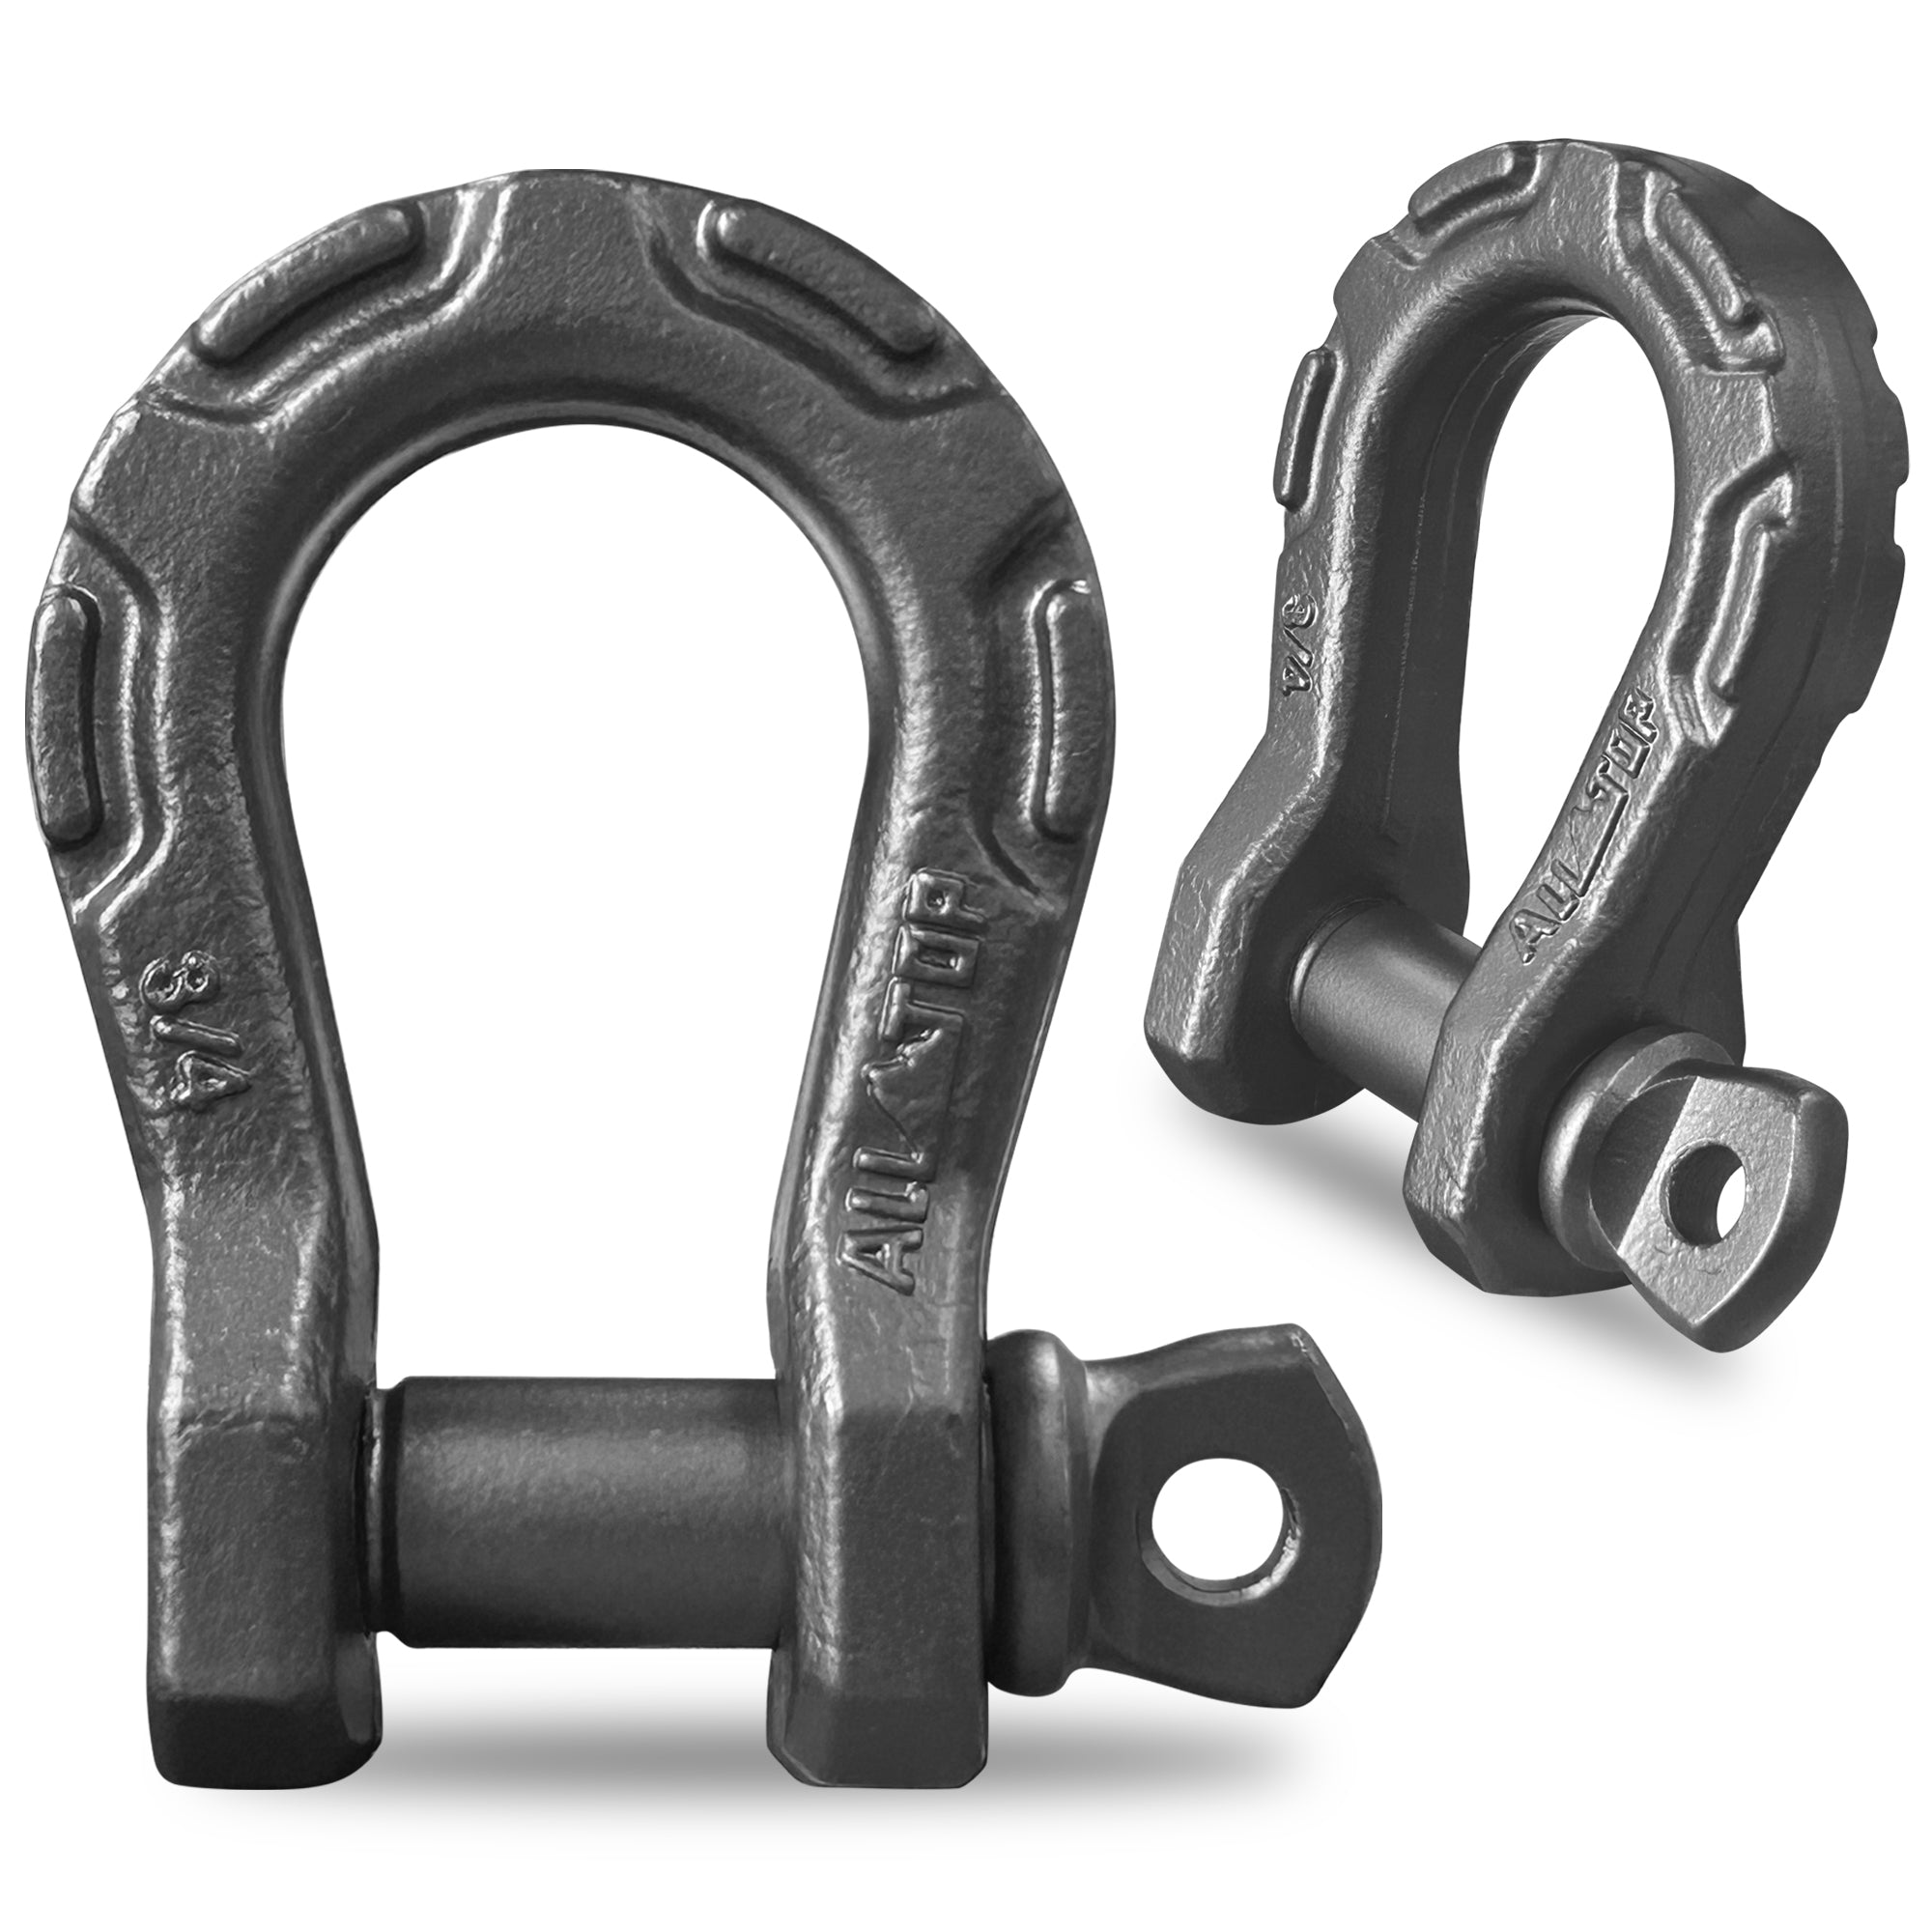 D Ring Shackle 3/4" Fully Forged with 7/8 Pin - 79500Lbs - 2PCS